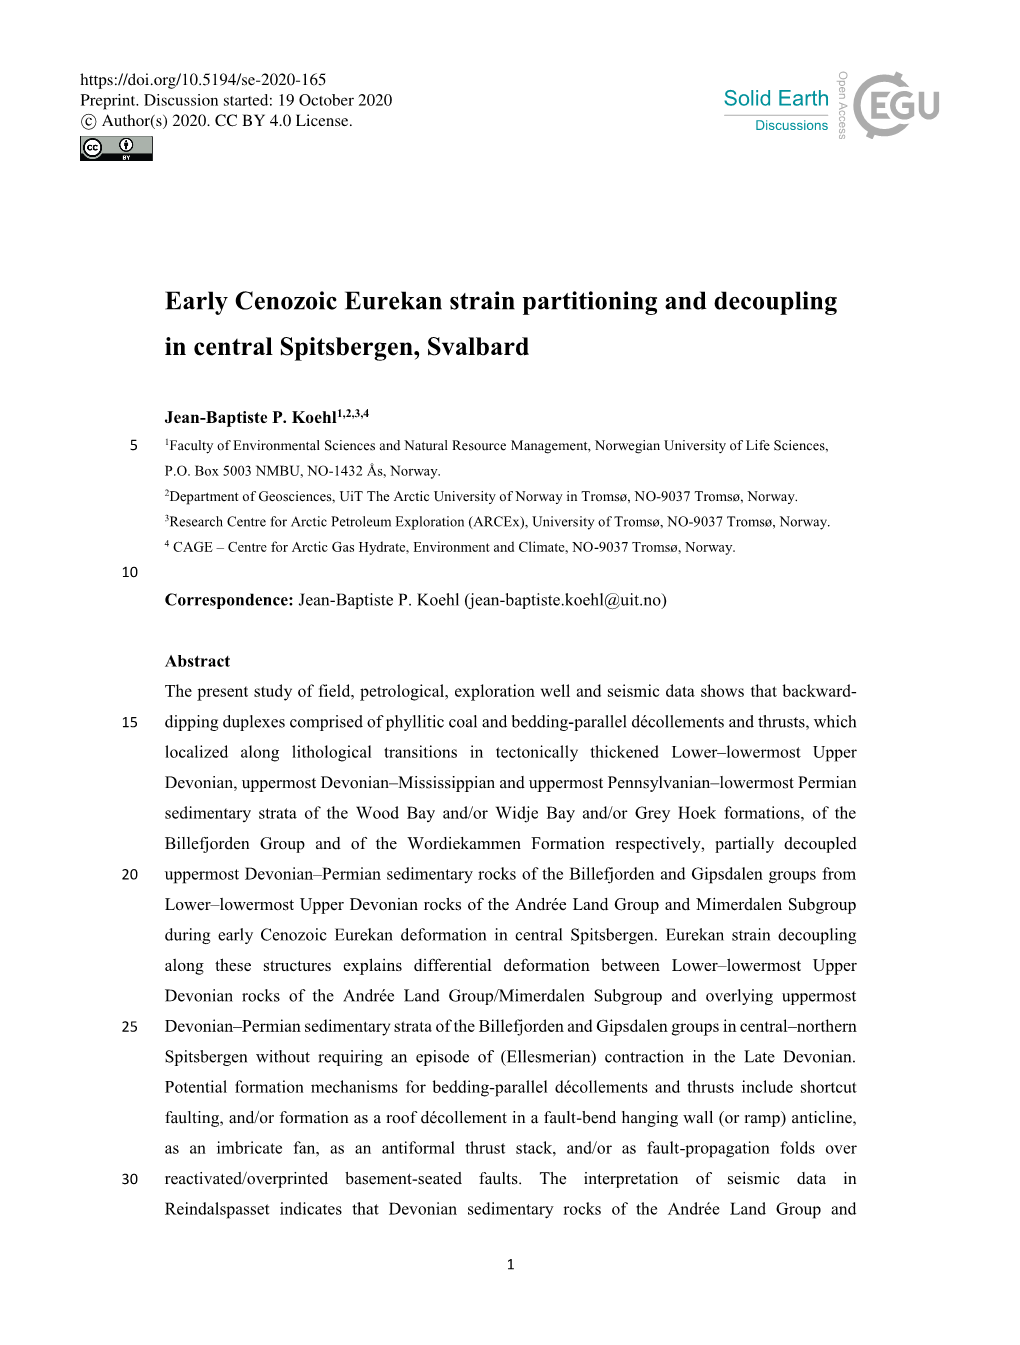 Early Cenozoic Eurekan Strain Partitioning and Decoupling in Central Spitsbergen, Svalbard